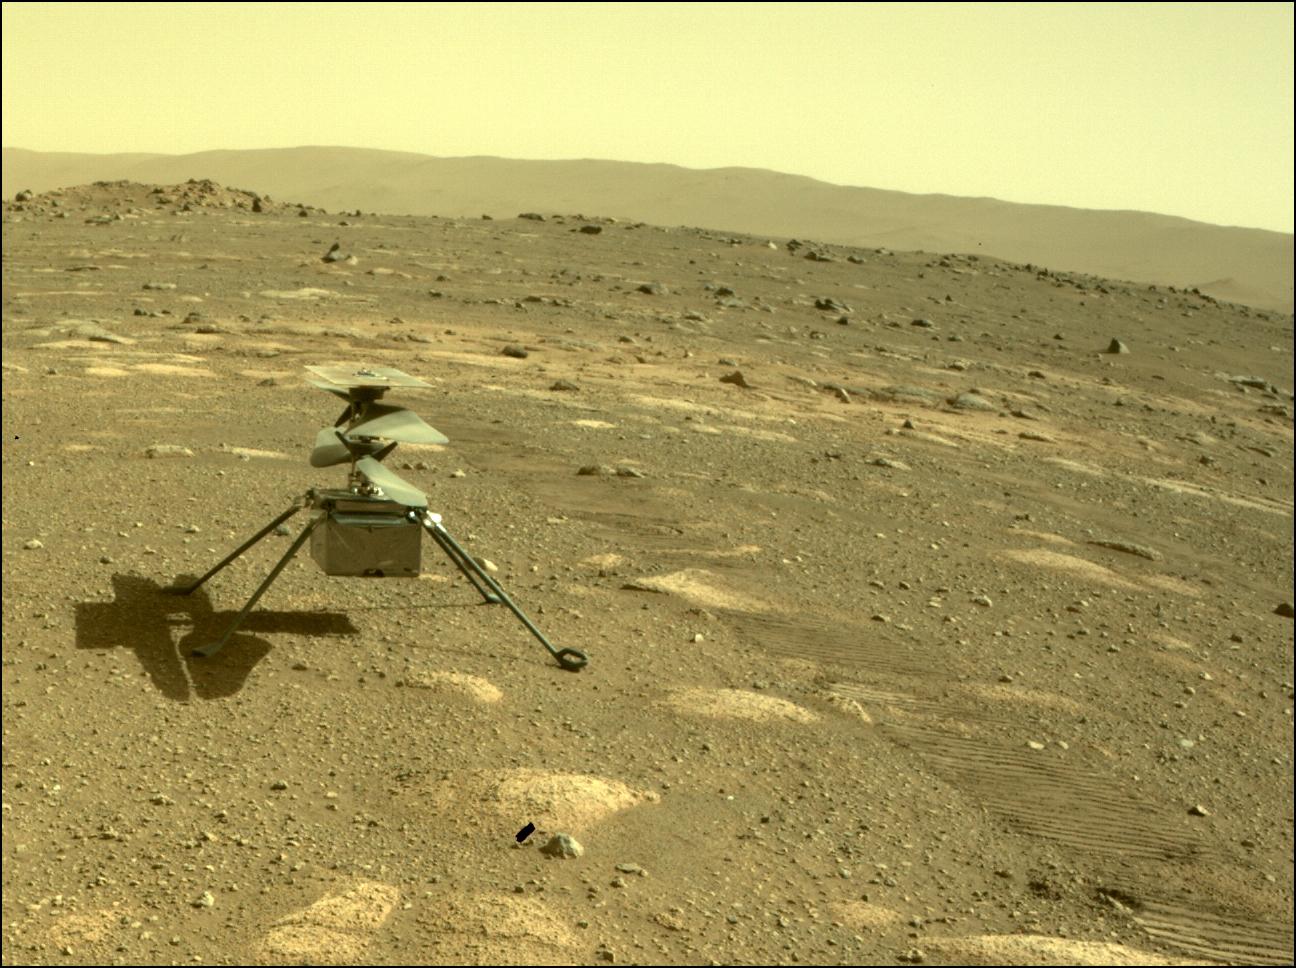 Nasa’s Ingenuity helicopter on the surface of Mars